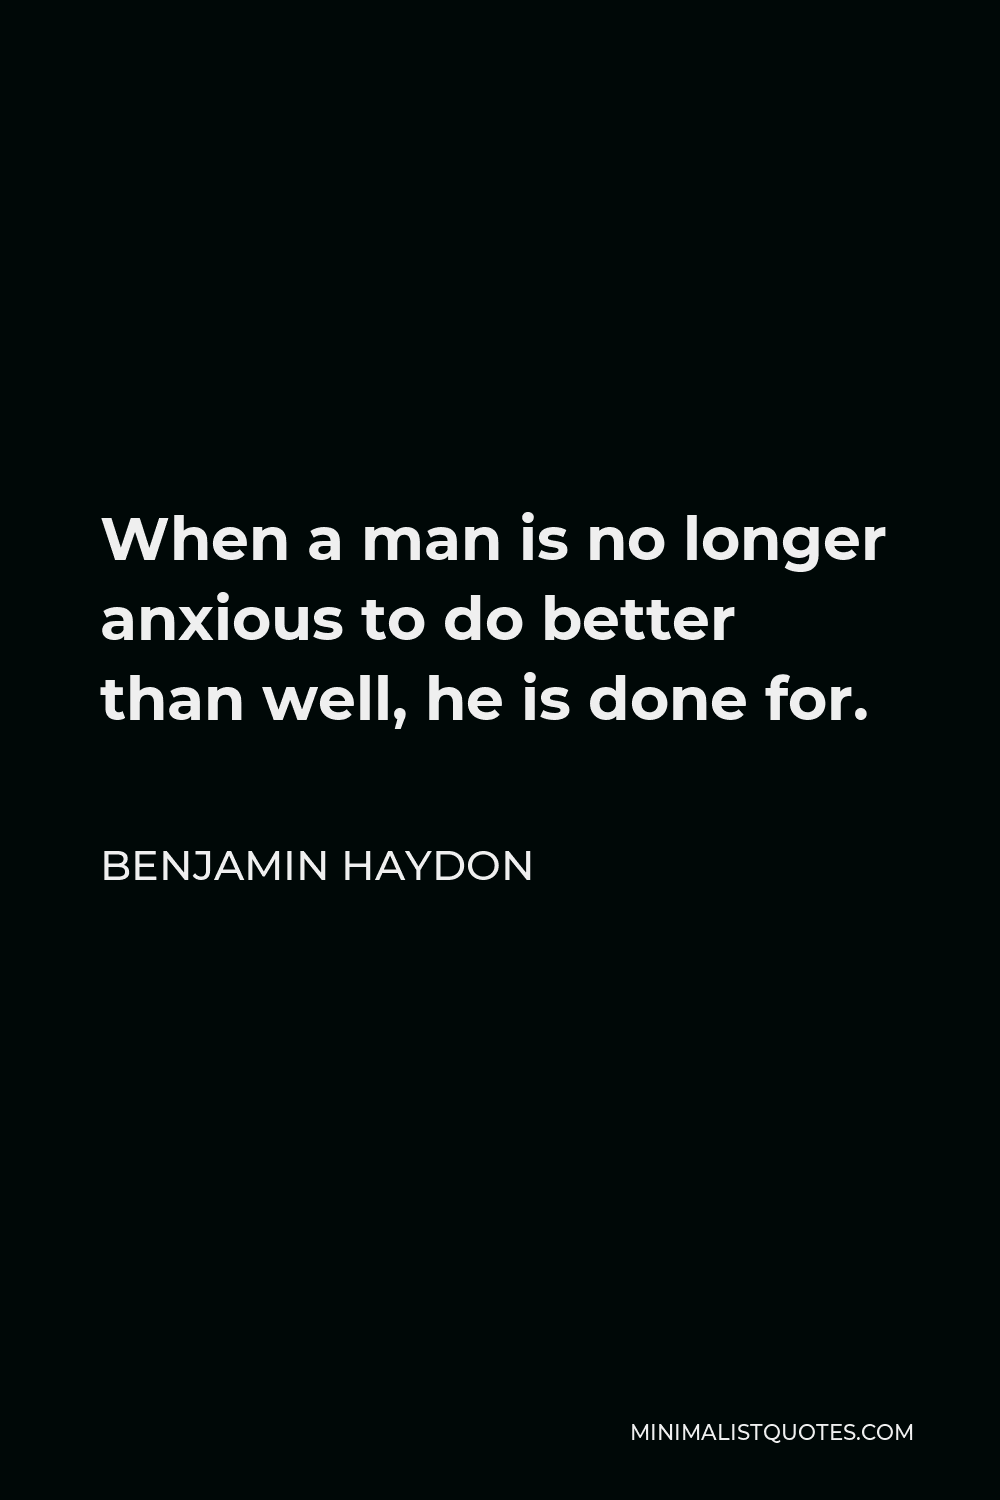 Benjamin Haydon Quote - When a man is no longer anxious to do better than well, he is done for.